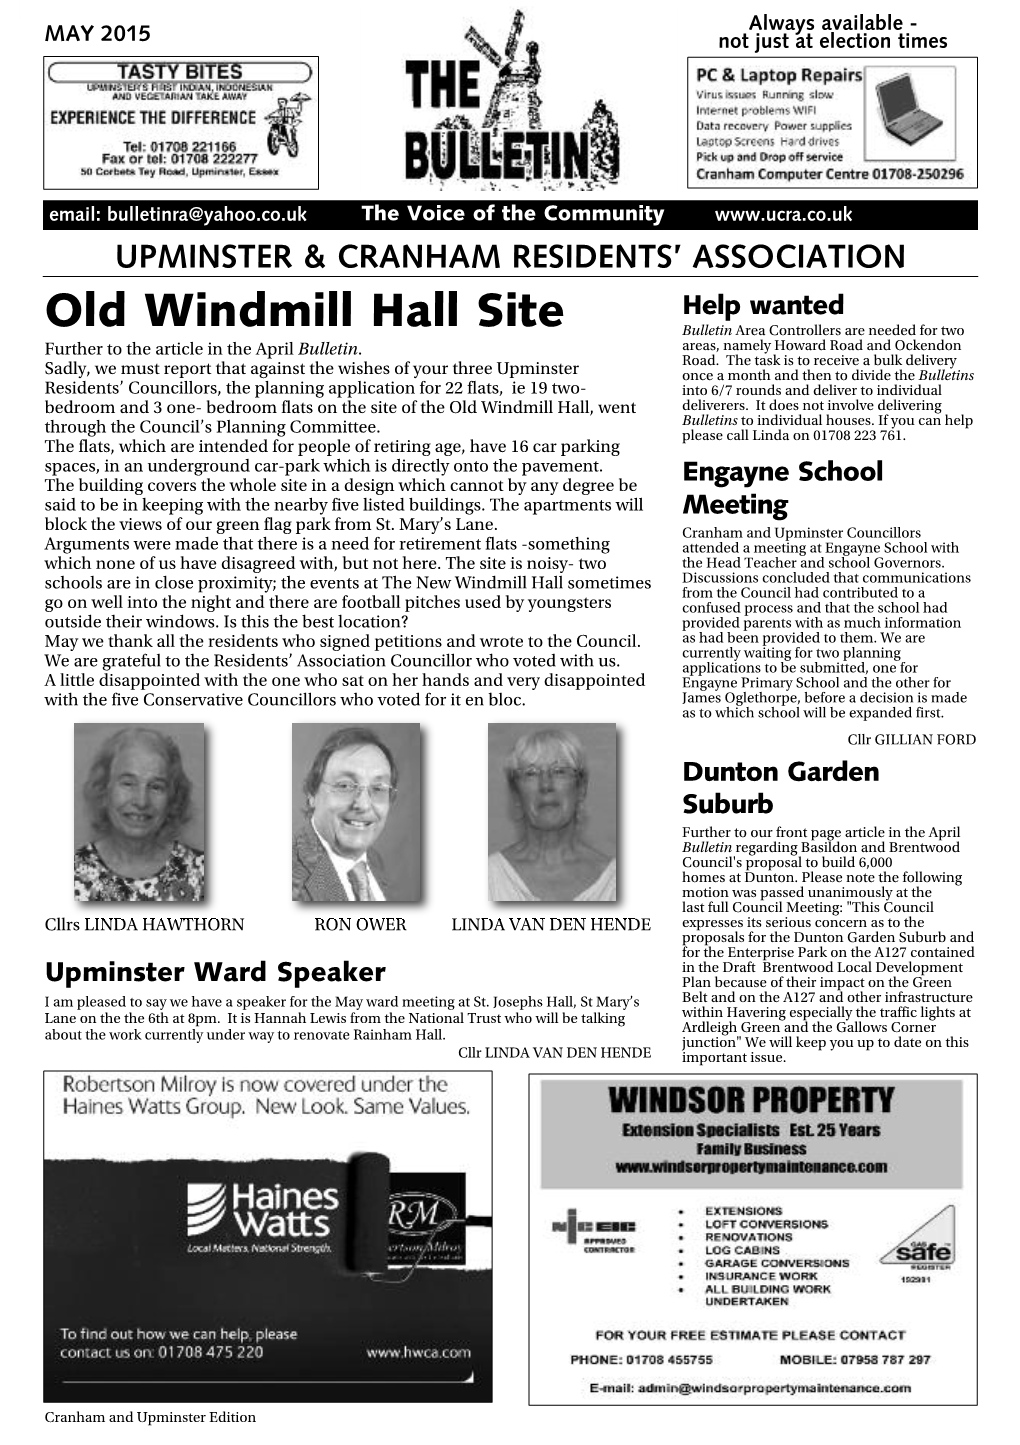 Old Windmill Hall Site Bulletin Area Controllers Are Needed for Two Further to the Article in the April Bulletin